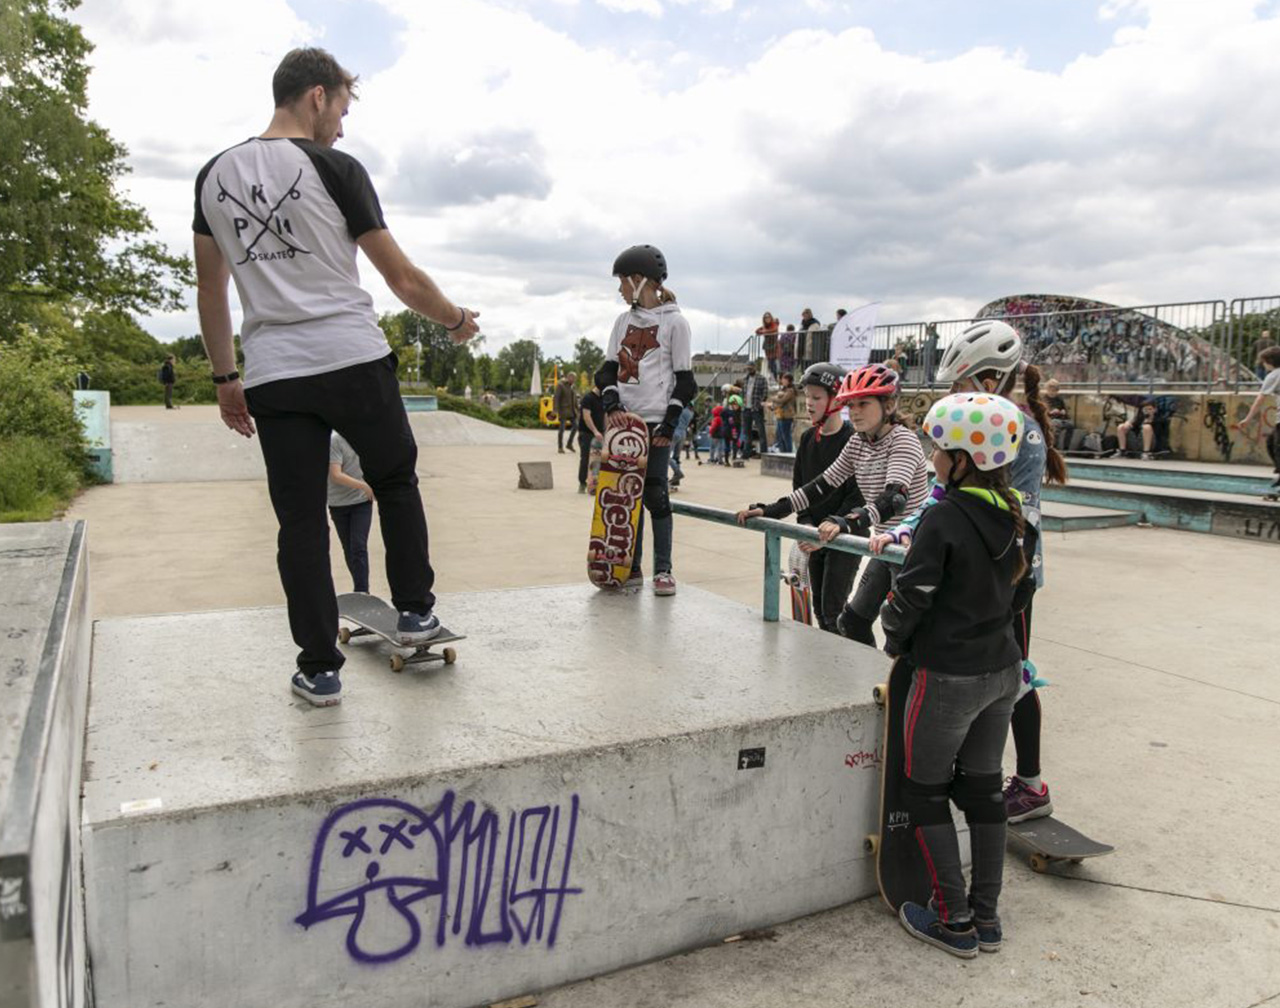 Take skateboard lessons in Hasselt